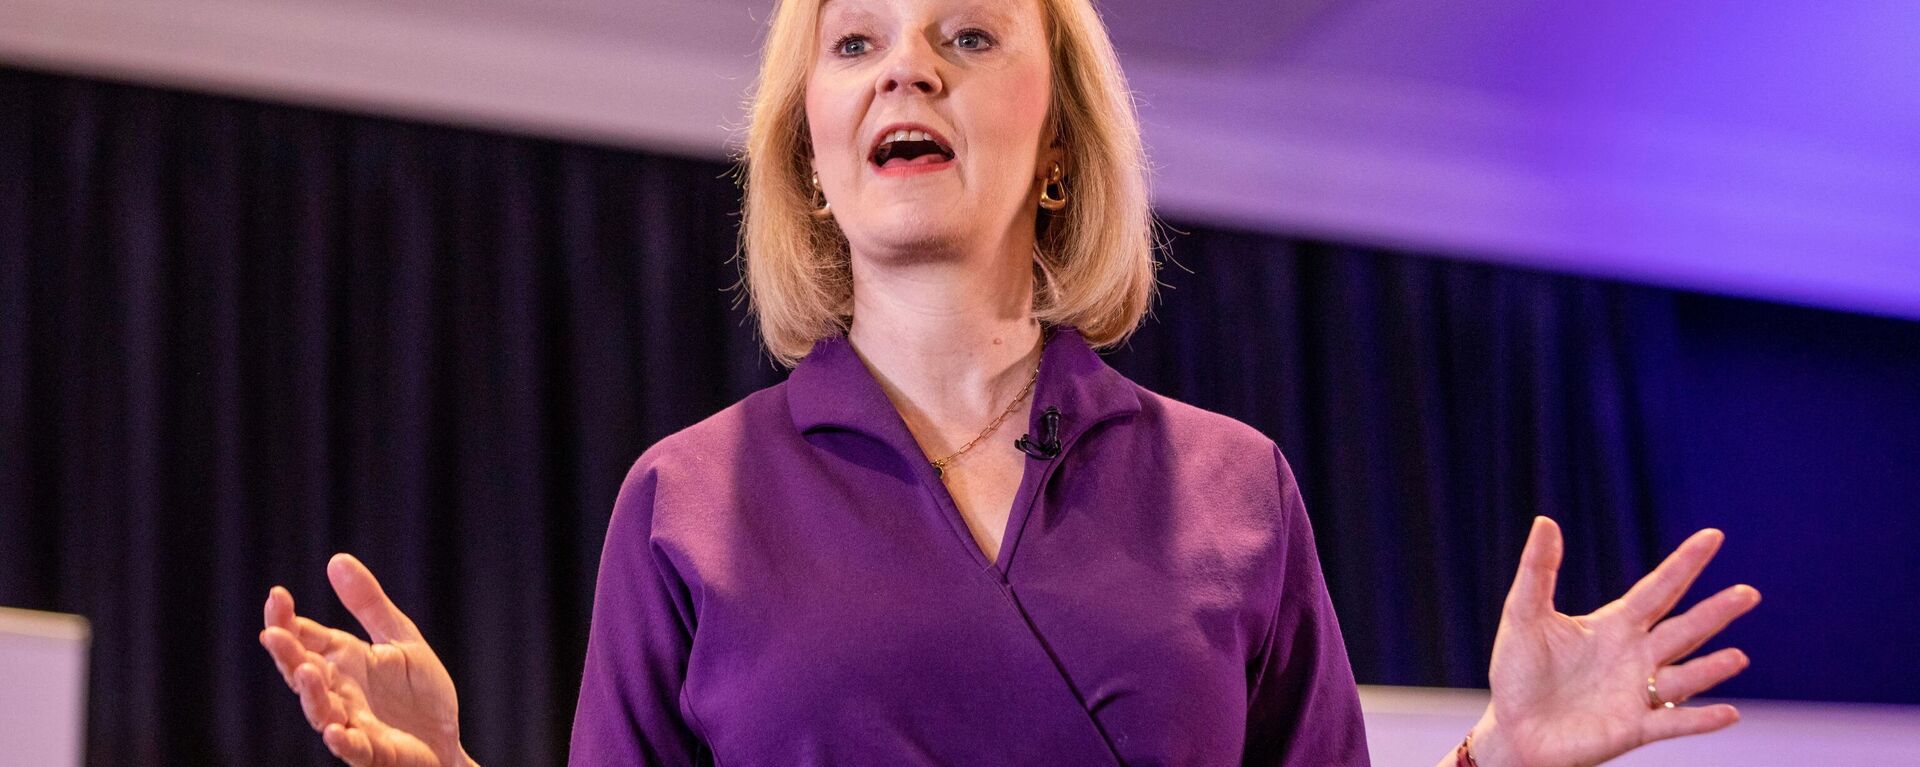 Contender to become the country's next Prime minister and leader of the Conservative party British Foreign Secretary Liz Truss speaks during a Conservative Party Hustings event in Belfast, on August 17, 2022 - Sputnik International, 1920, 04.09.2022